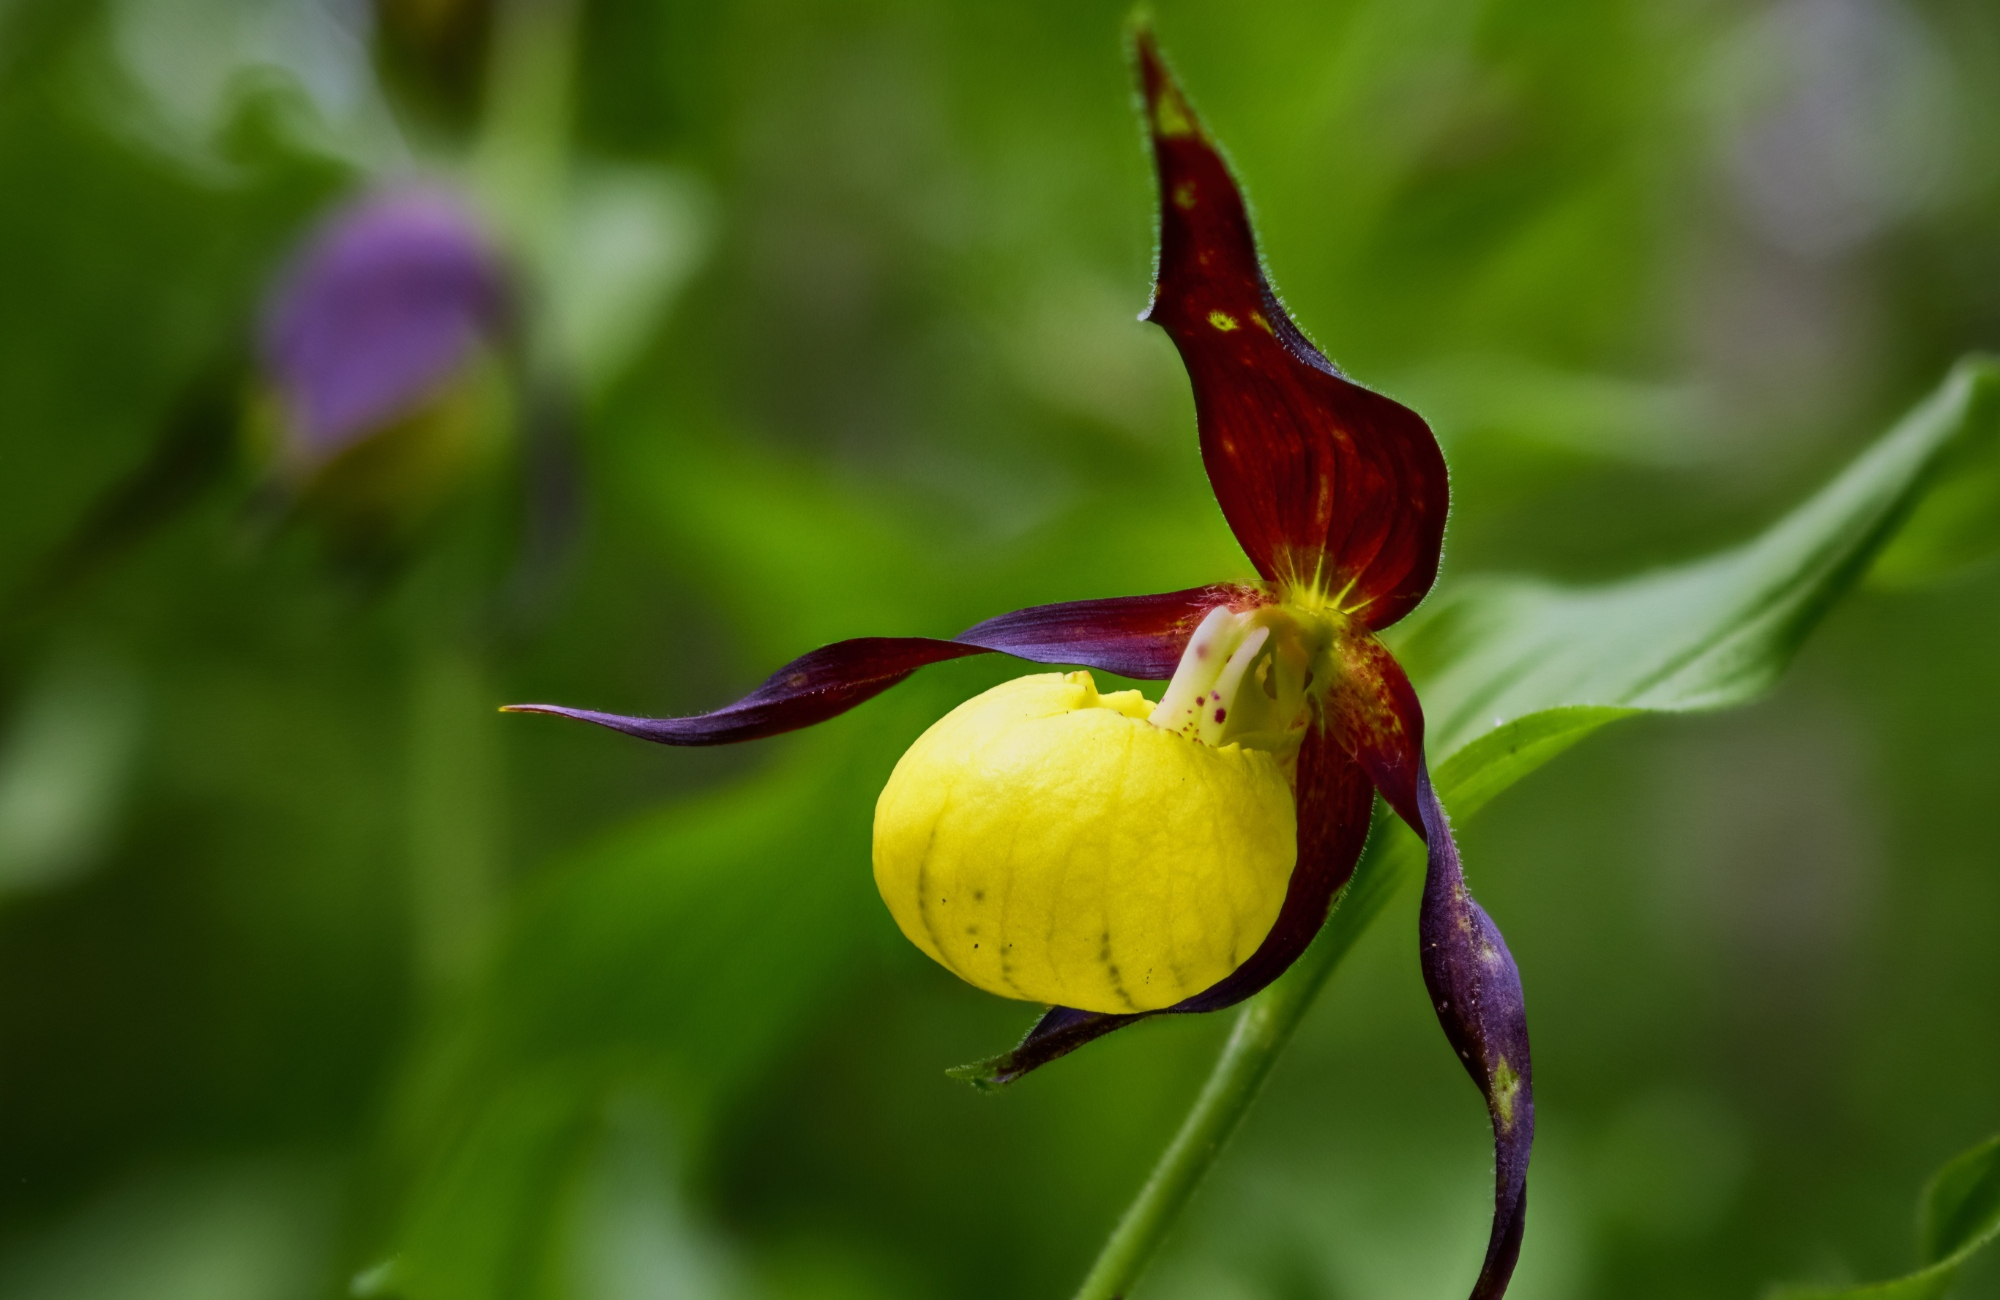 Lady’s-slipper orchid with slipper-shaped pouch with elegant maroon-brown ribbon-like petals